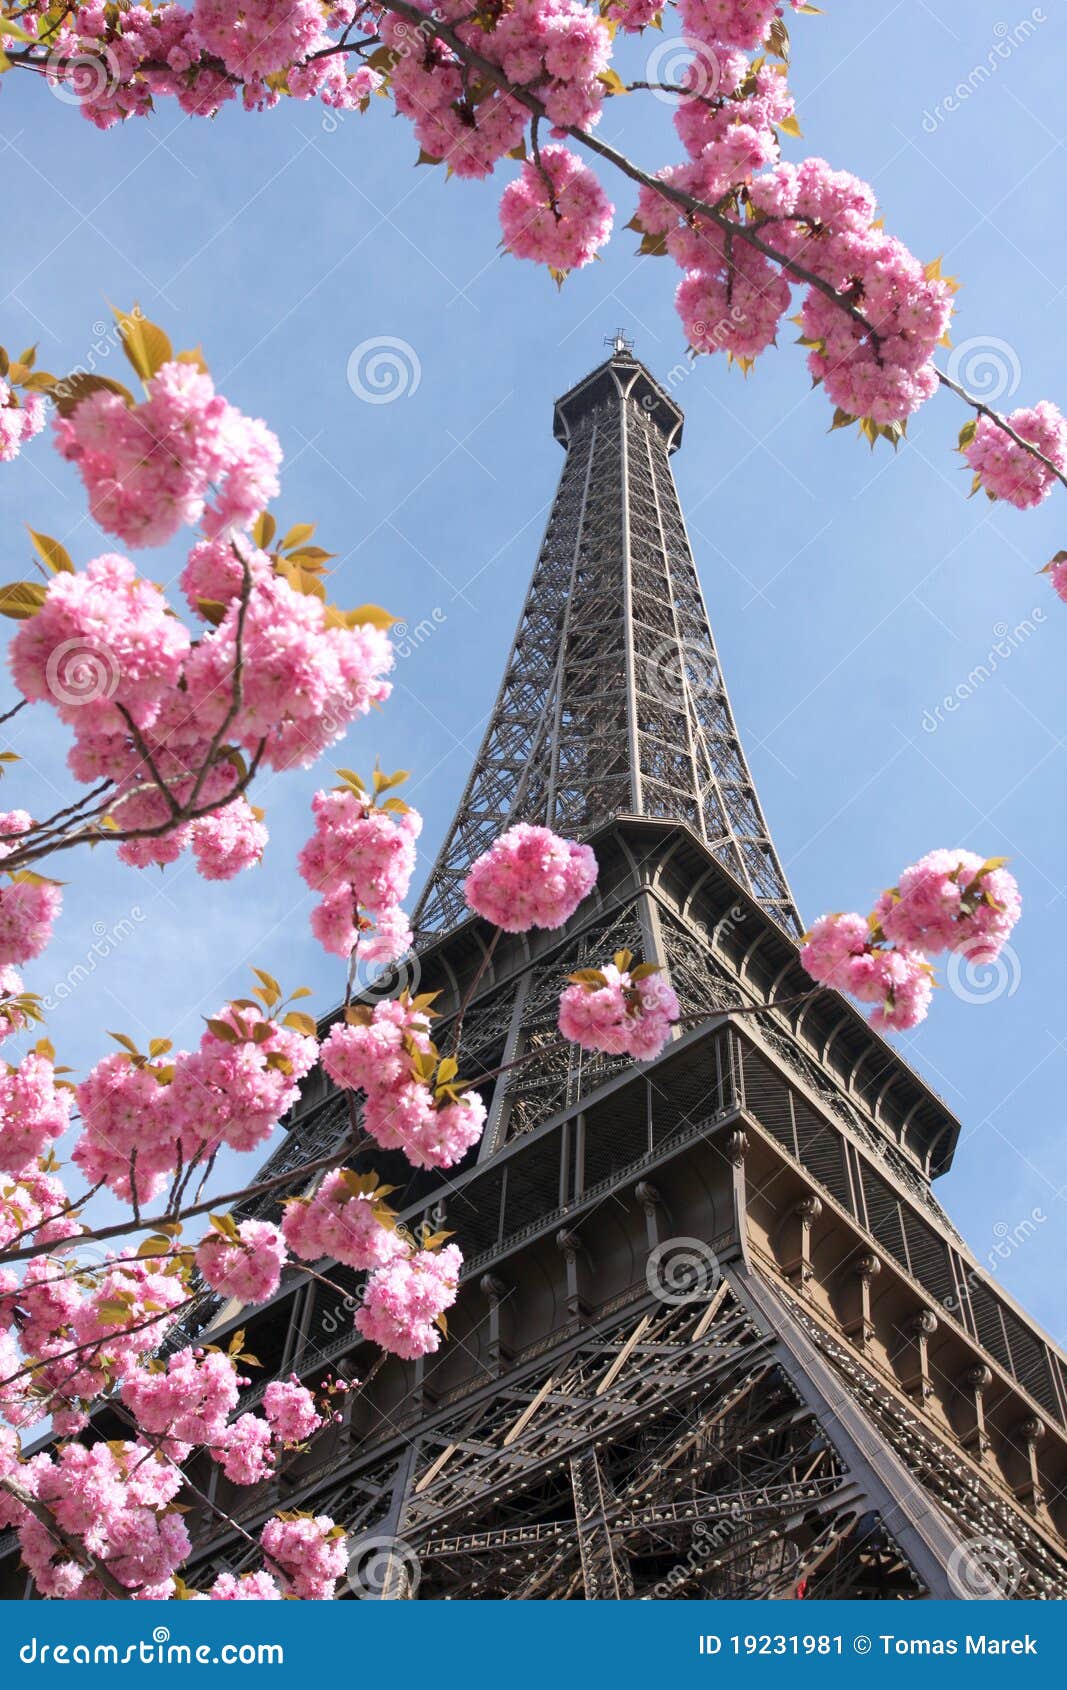 Eiffel Tower In Spring, Paris, France Stock Image - Image: 19231981